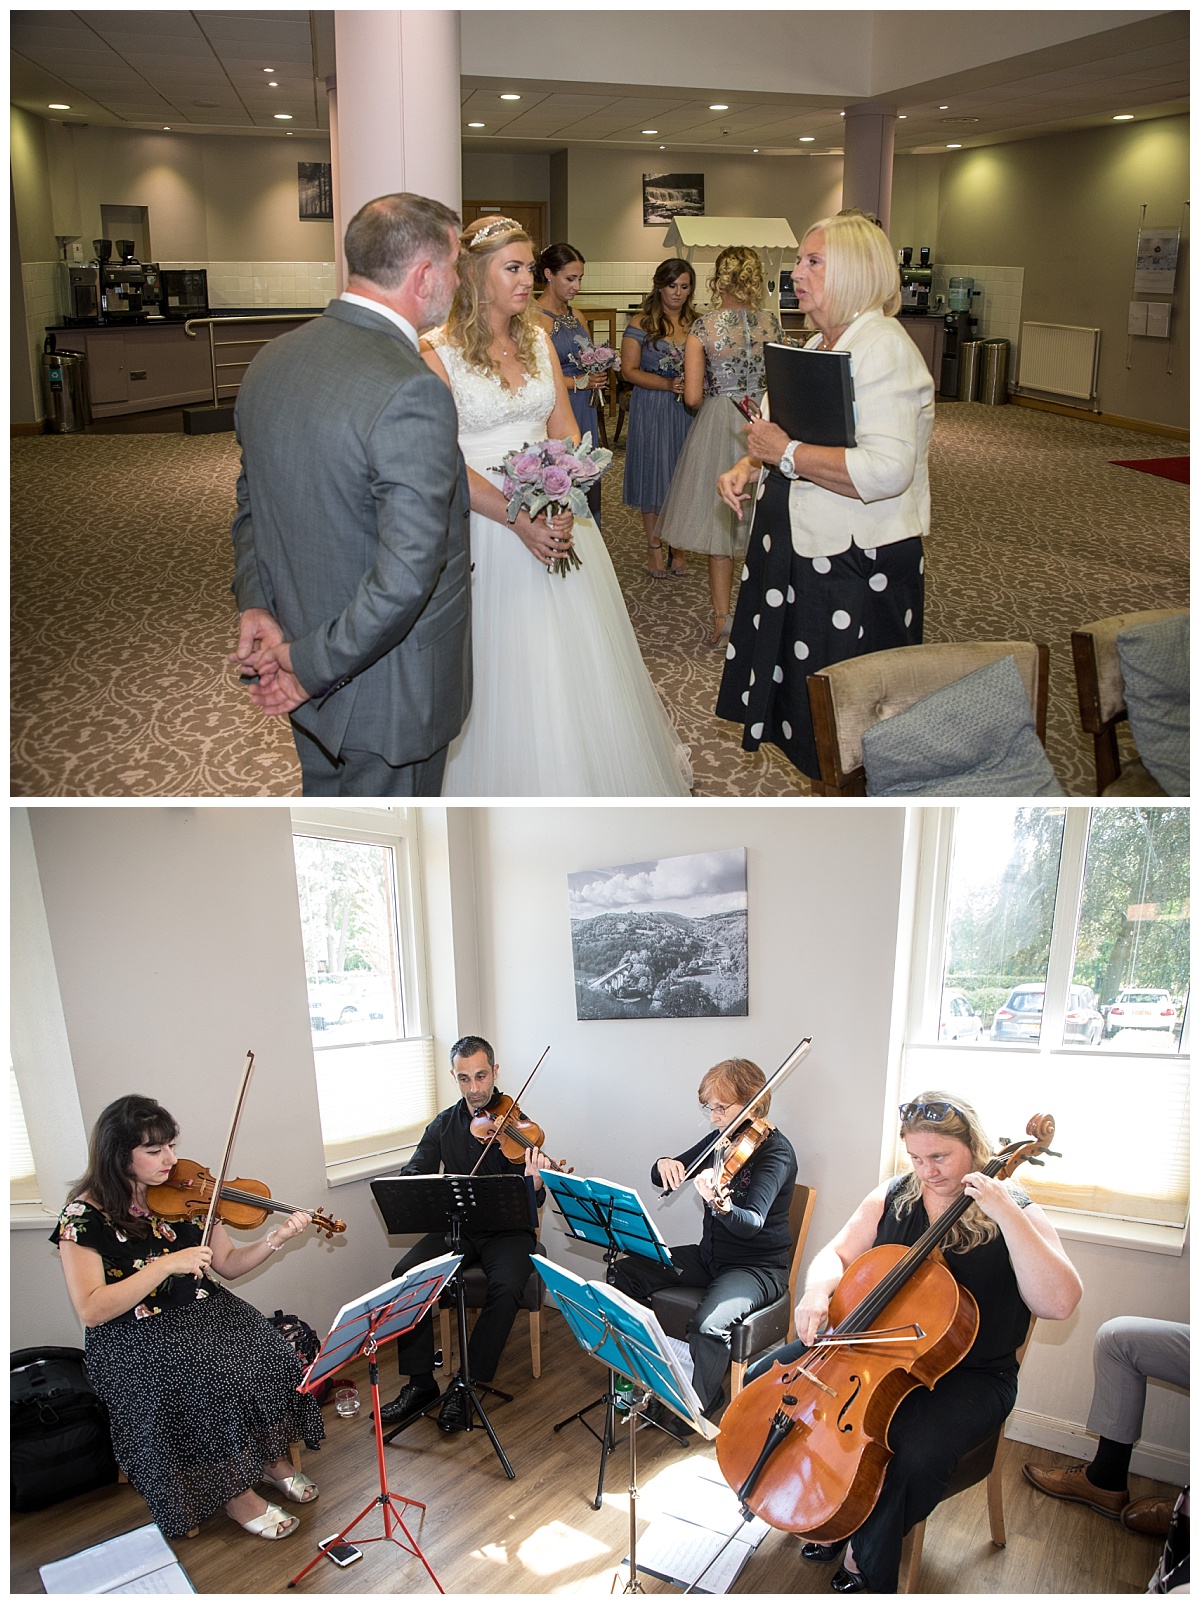 Wedding Photography Manchester - Sam and James's Cheadle House Wedding 32